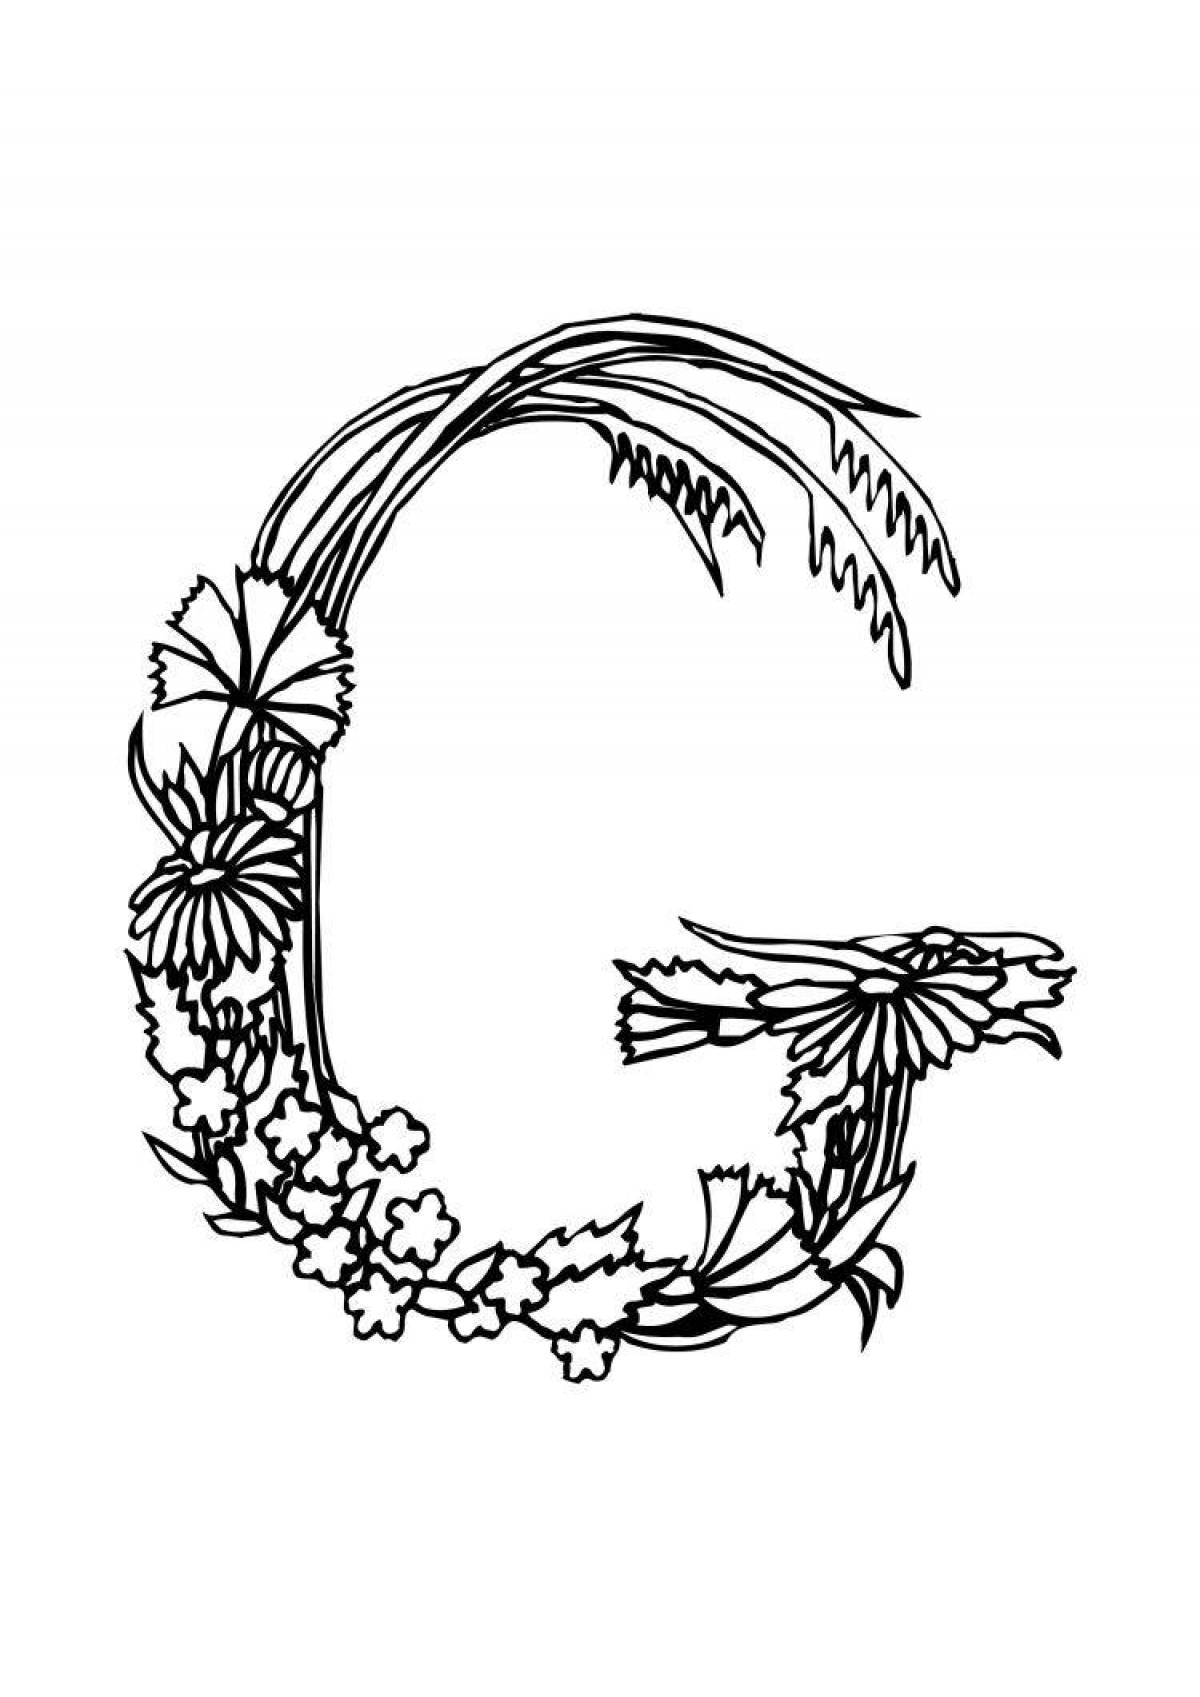 Flourishing letter c with flowers